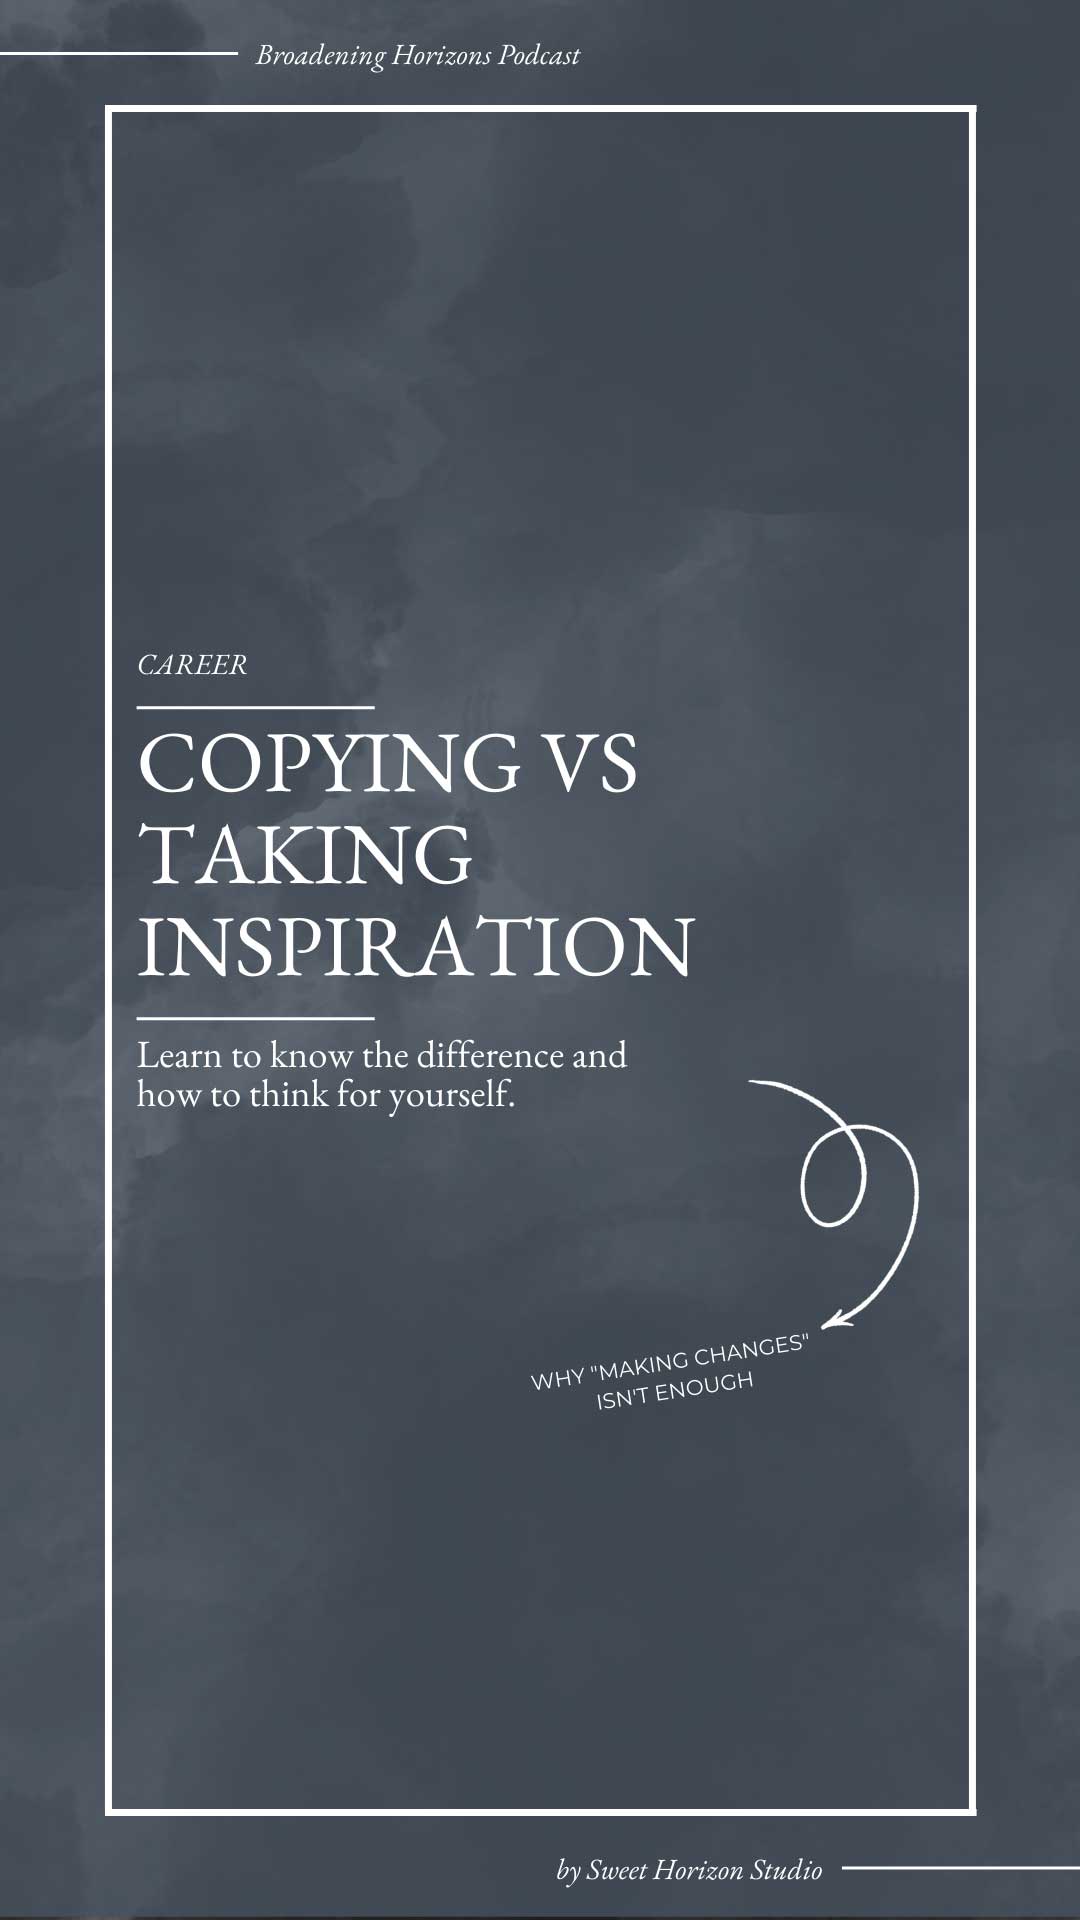 Copying vs Taking Inspiration : Know the Difference and Learn to Think for Yourself from www.sweethorizonblog.com